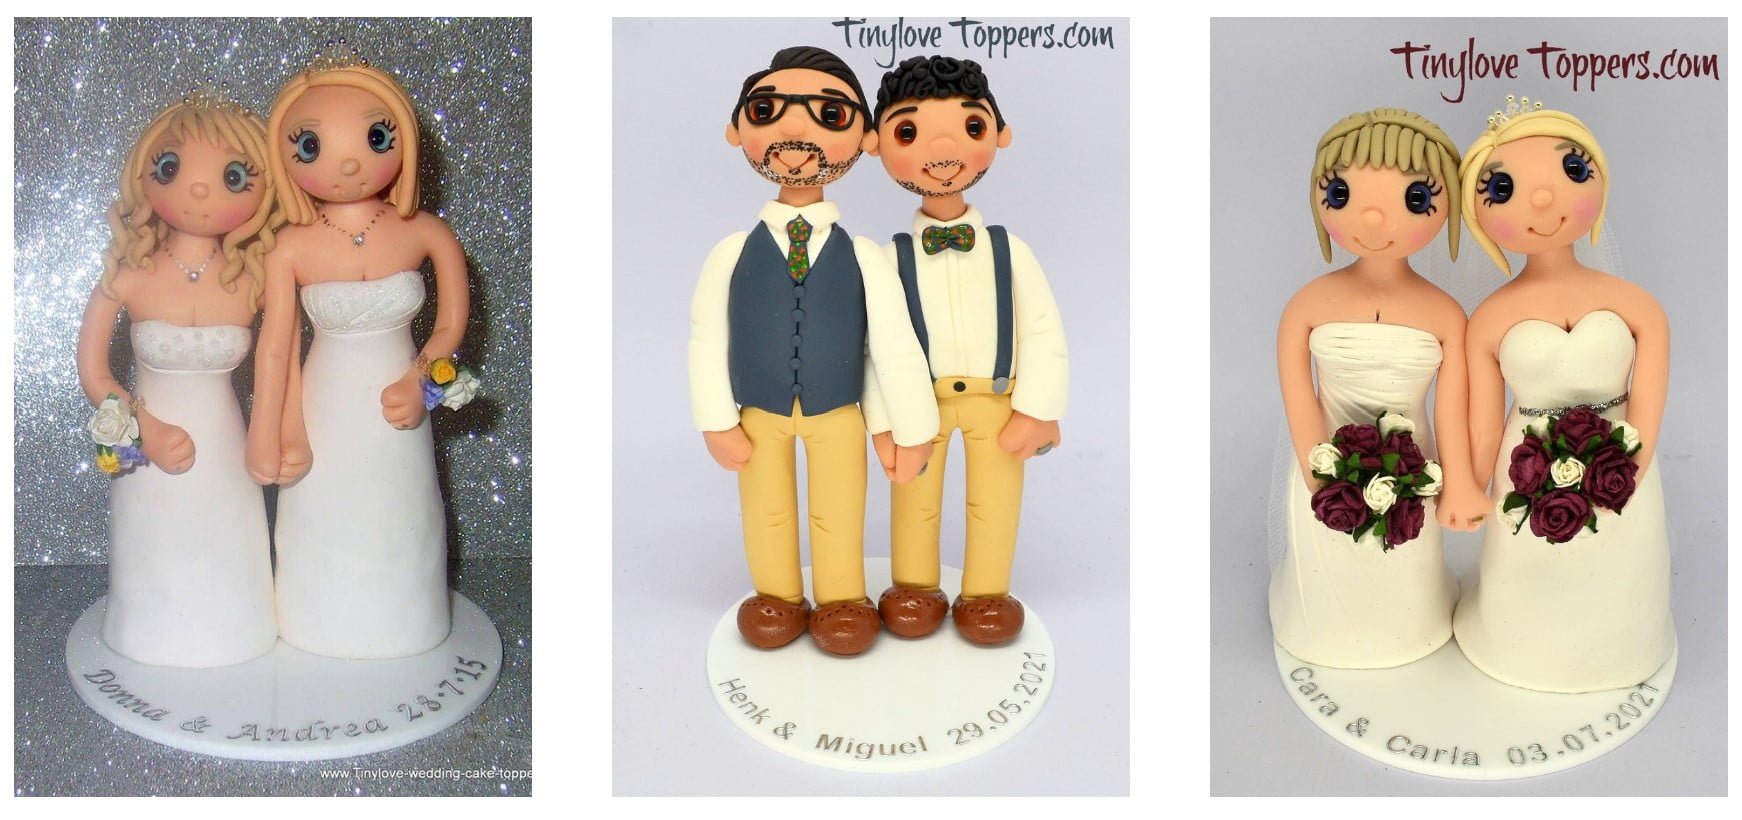 tinylovetoppers